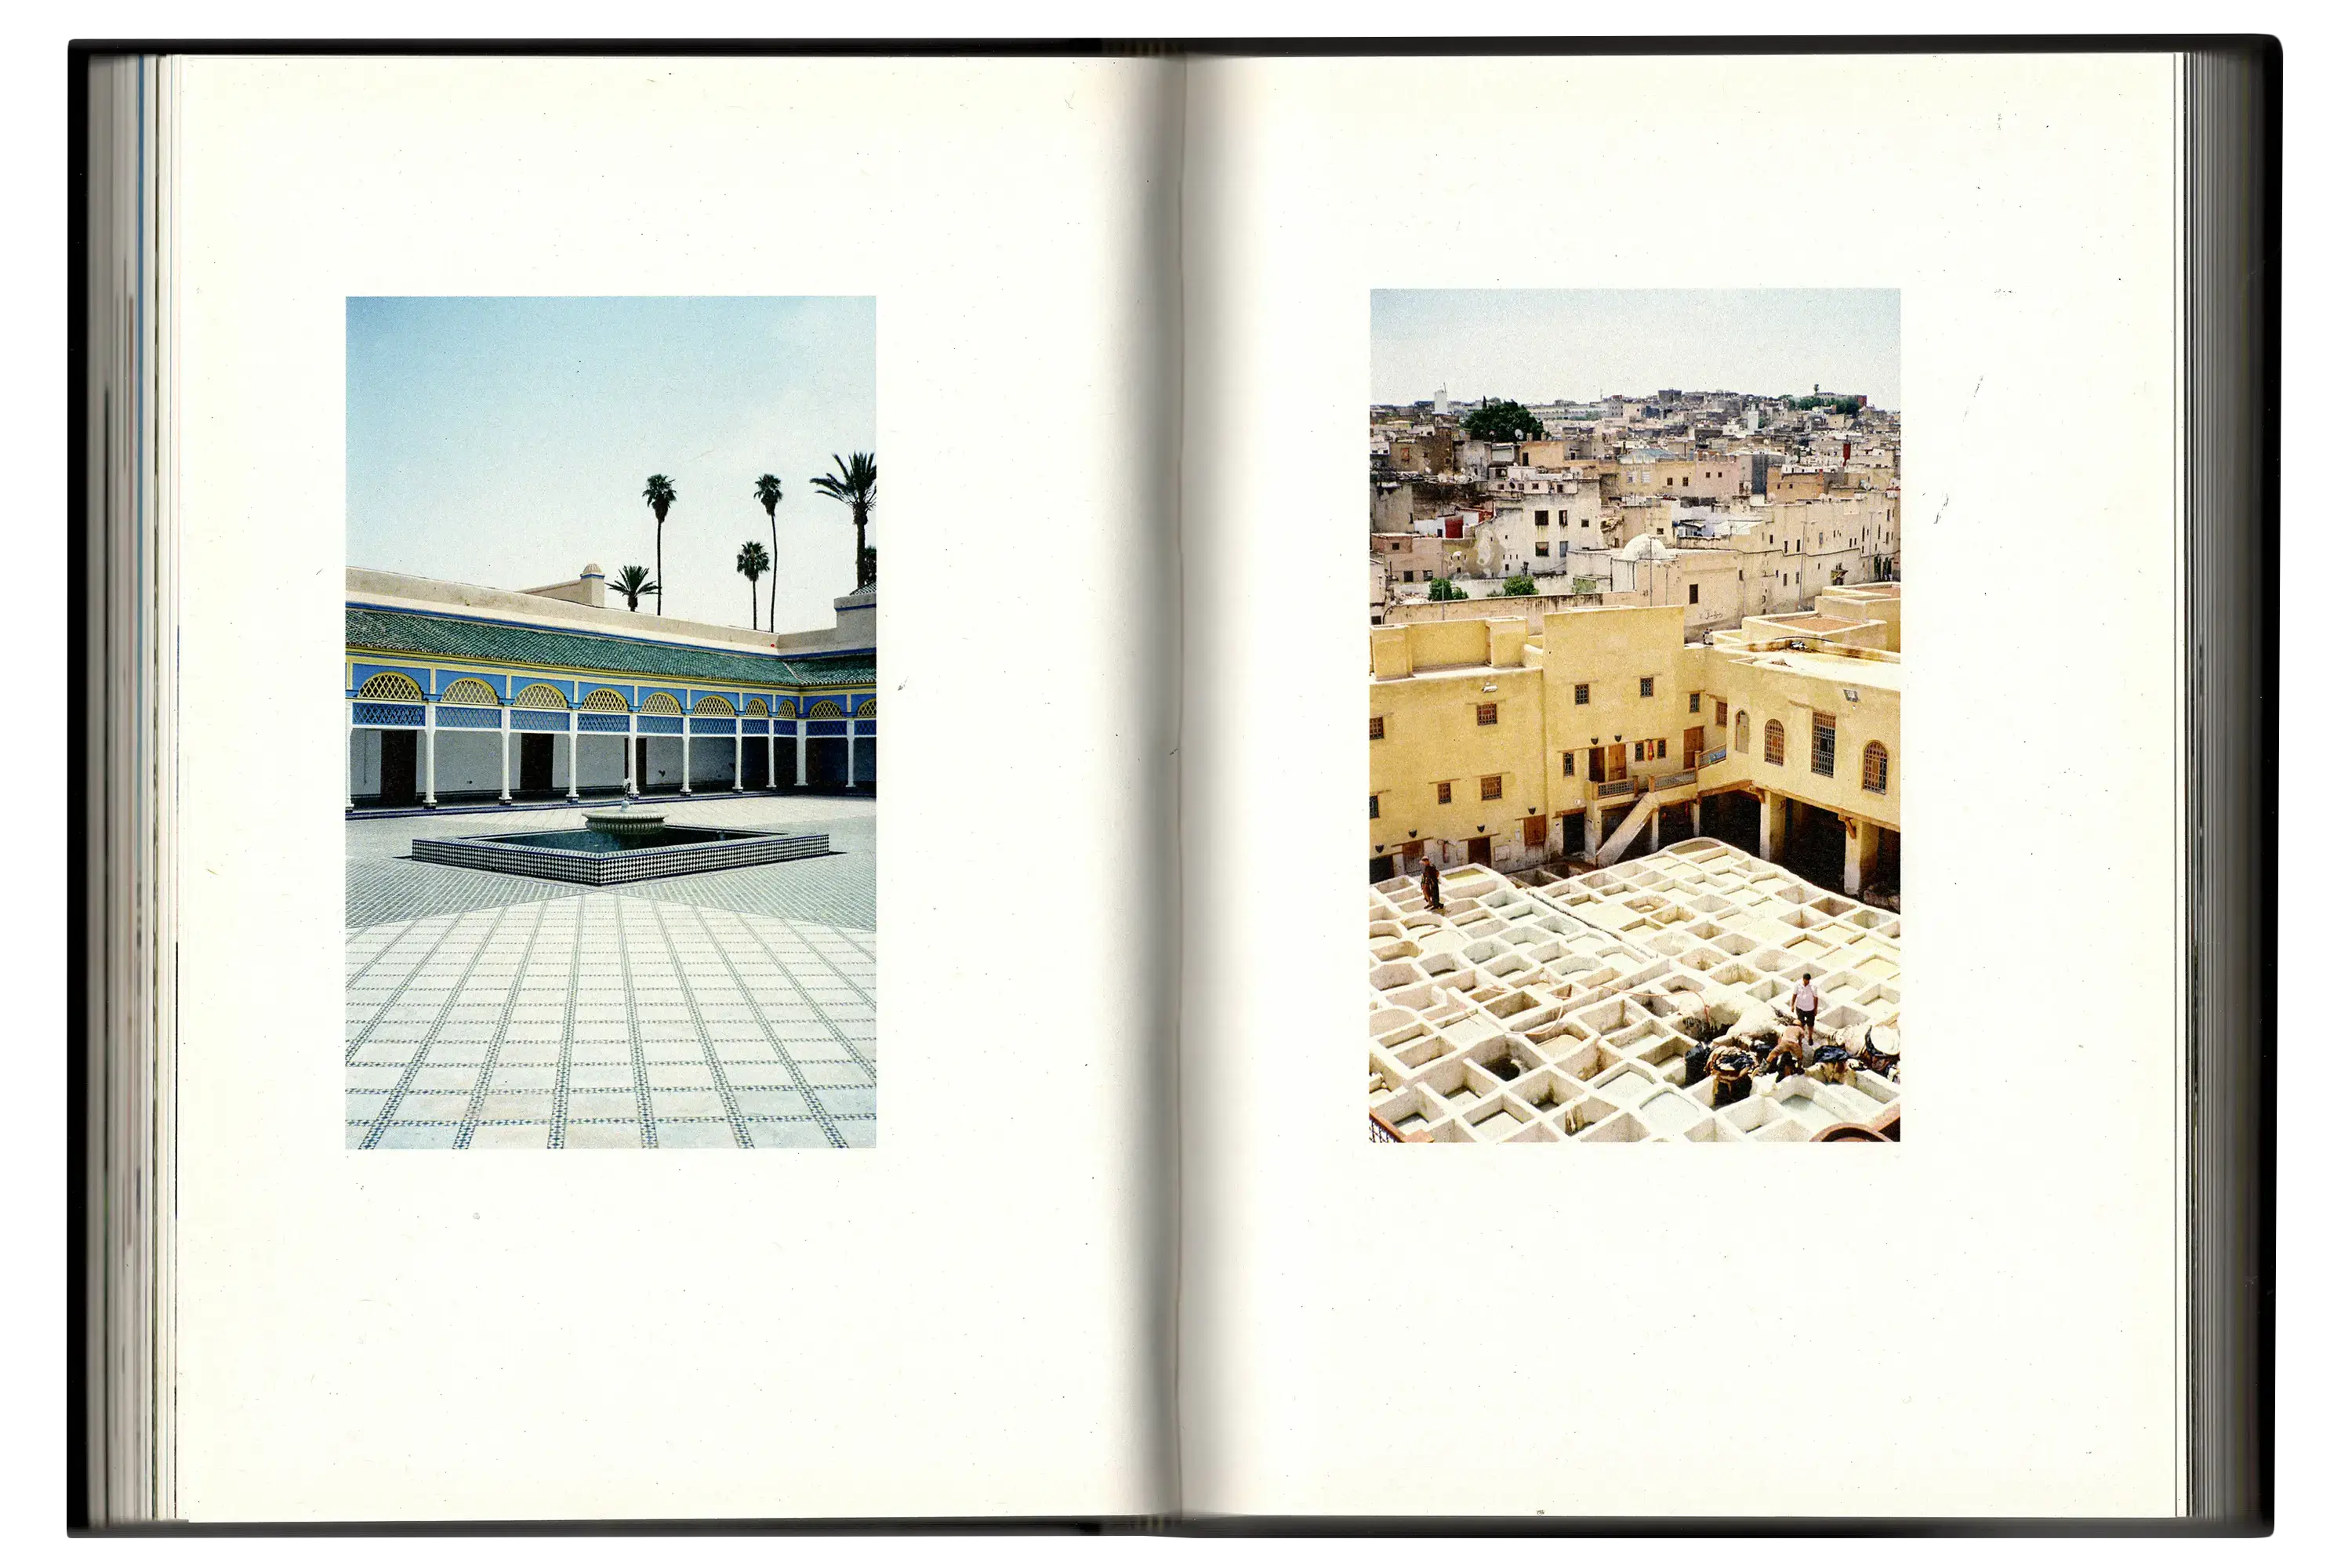 Imperfect Photo Book - left image of large courtyard with intricate mosaic pattern, right page image looking down on field of old run down buildings